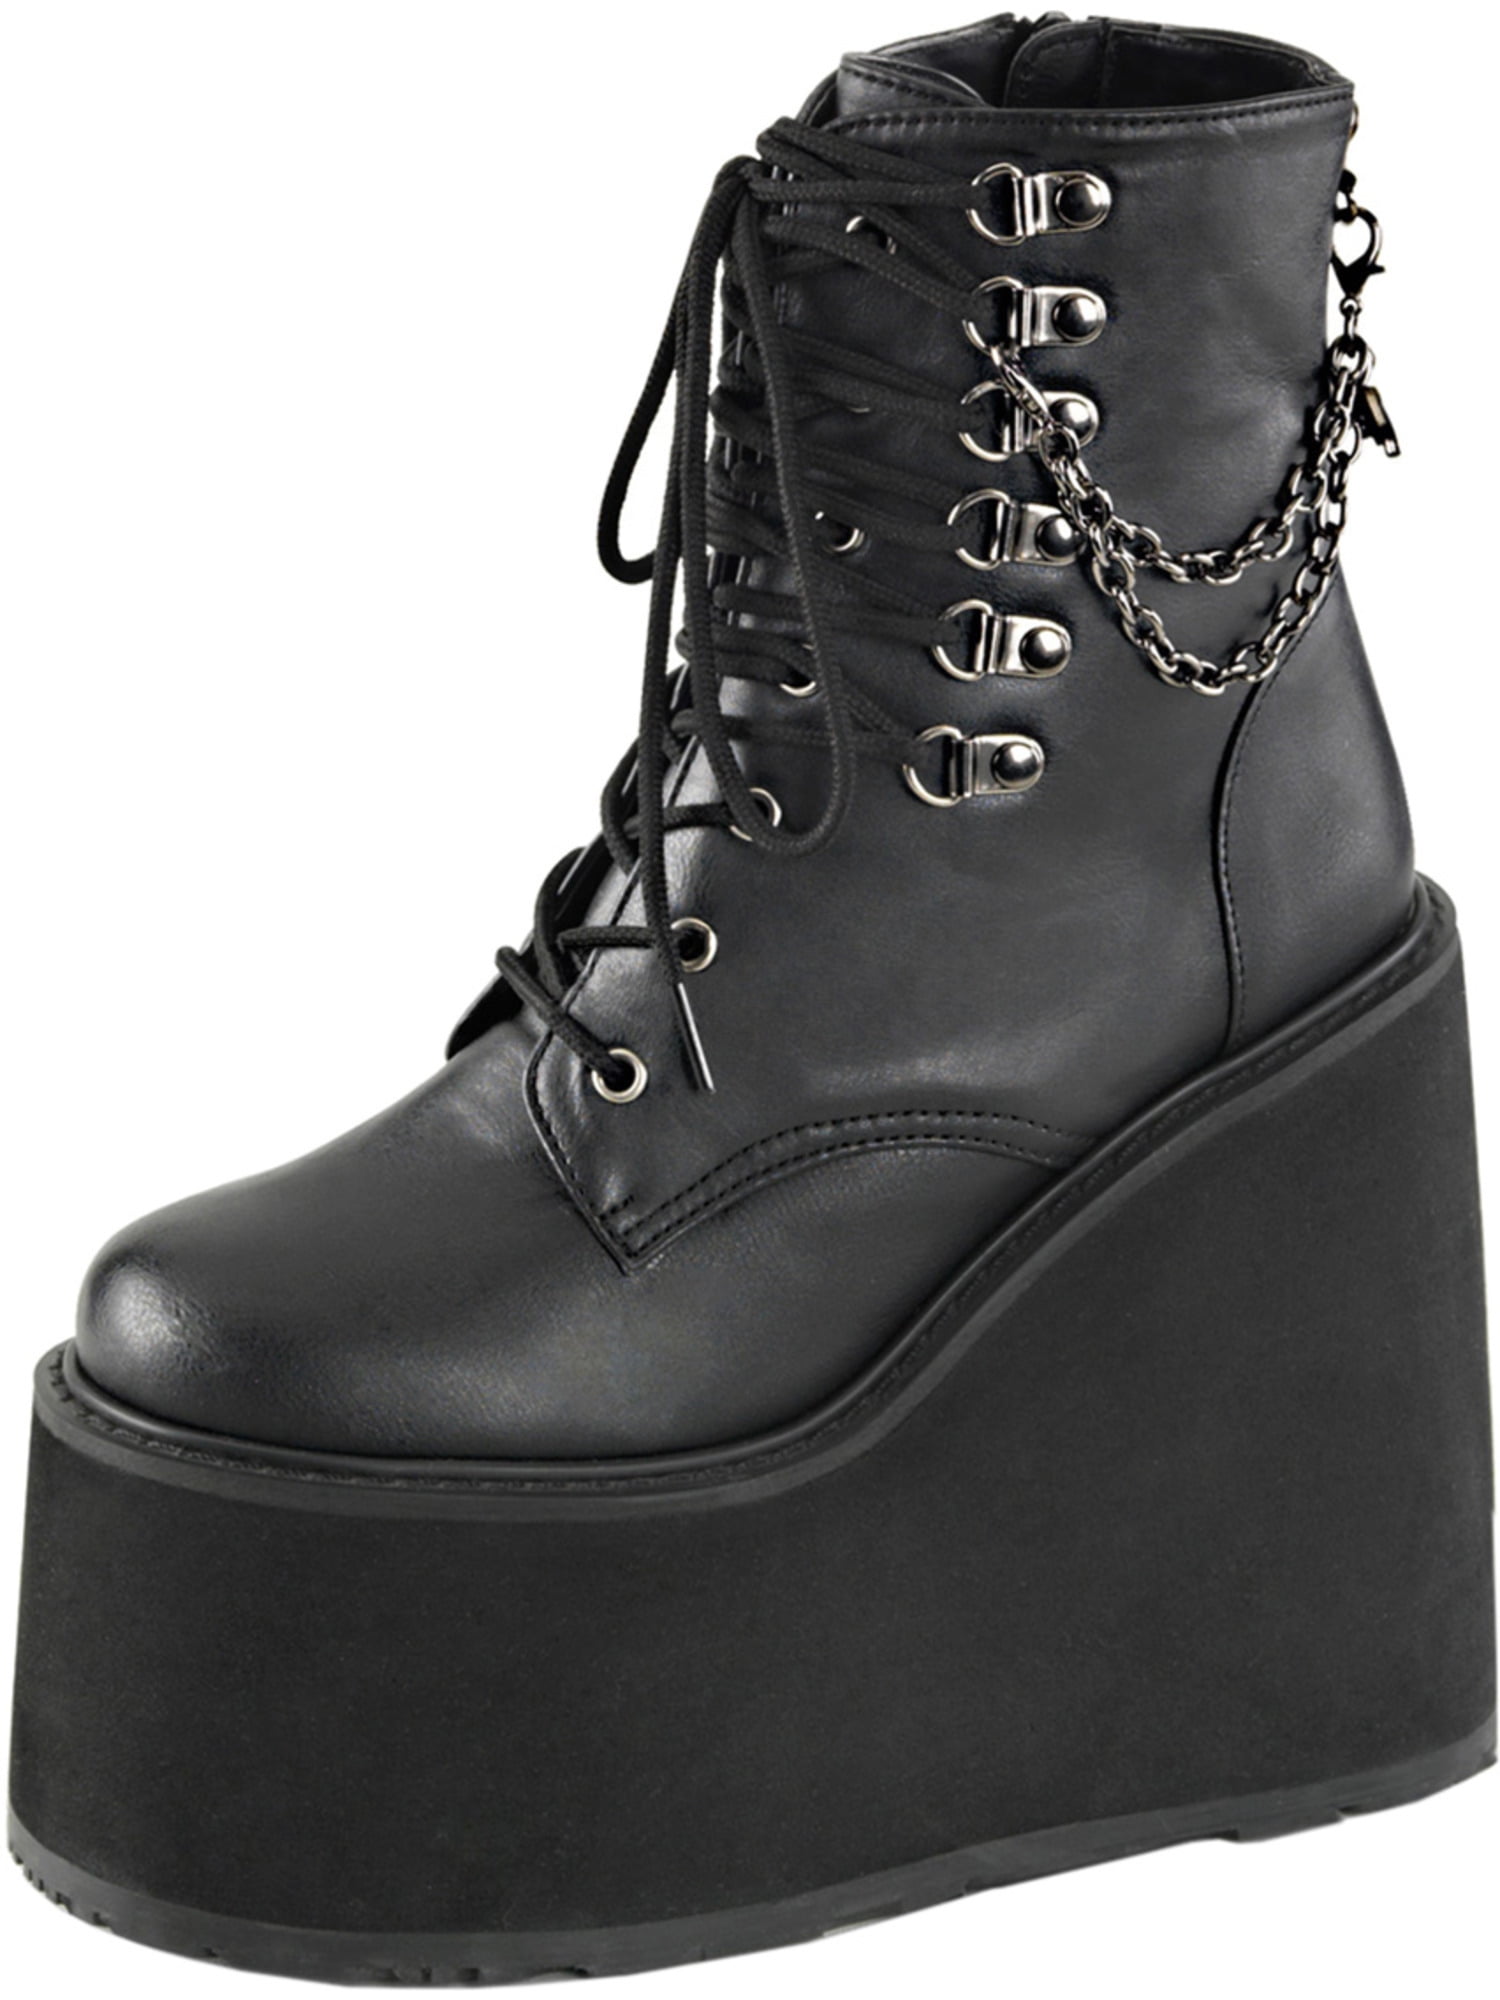 Demonia - Womens Black Ankle Boots Lace Up Booties Bats Platform Wedges ...